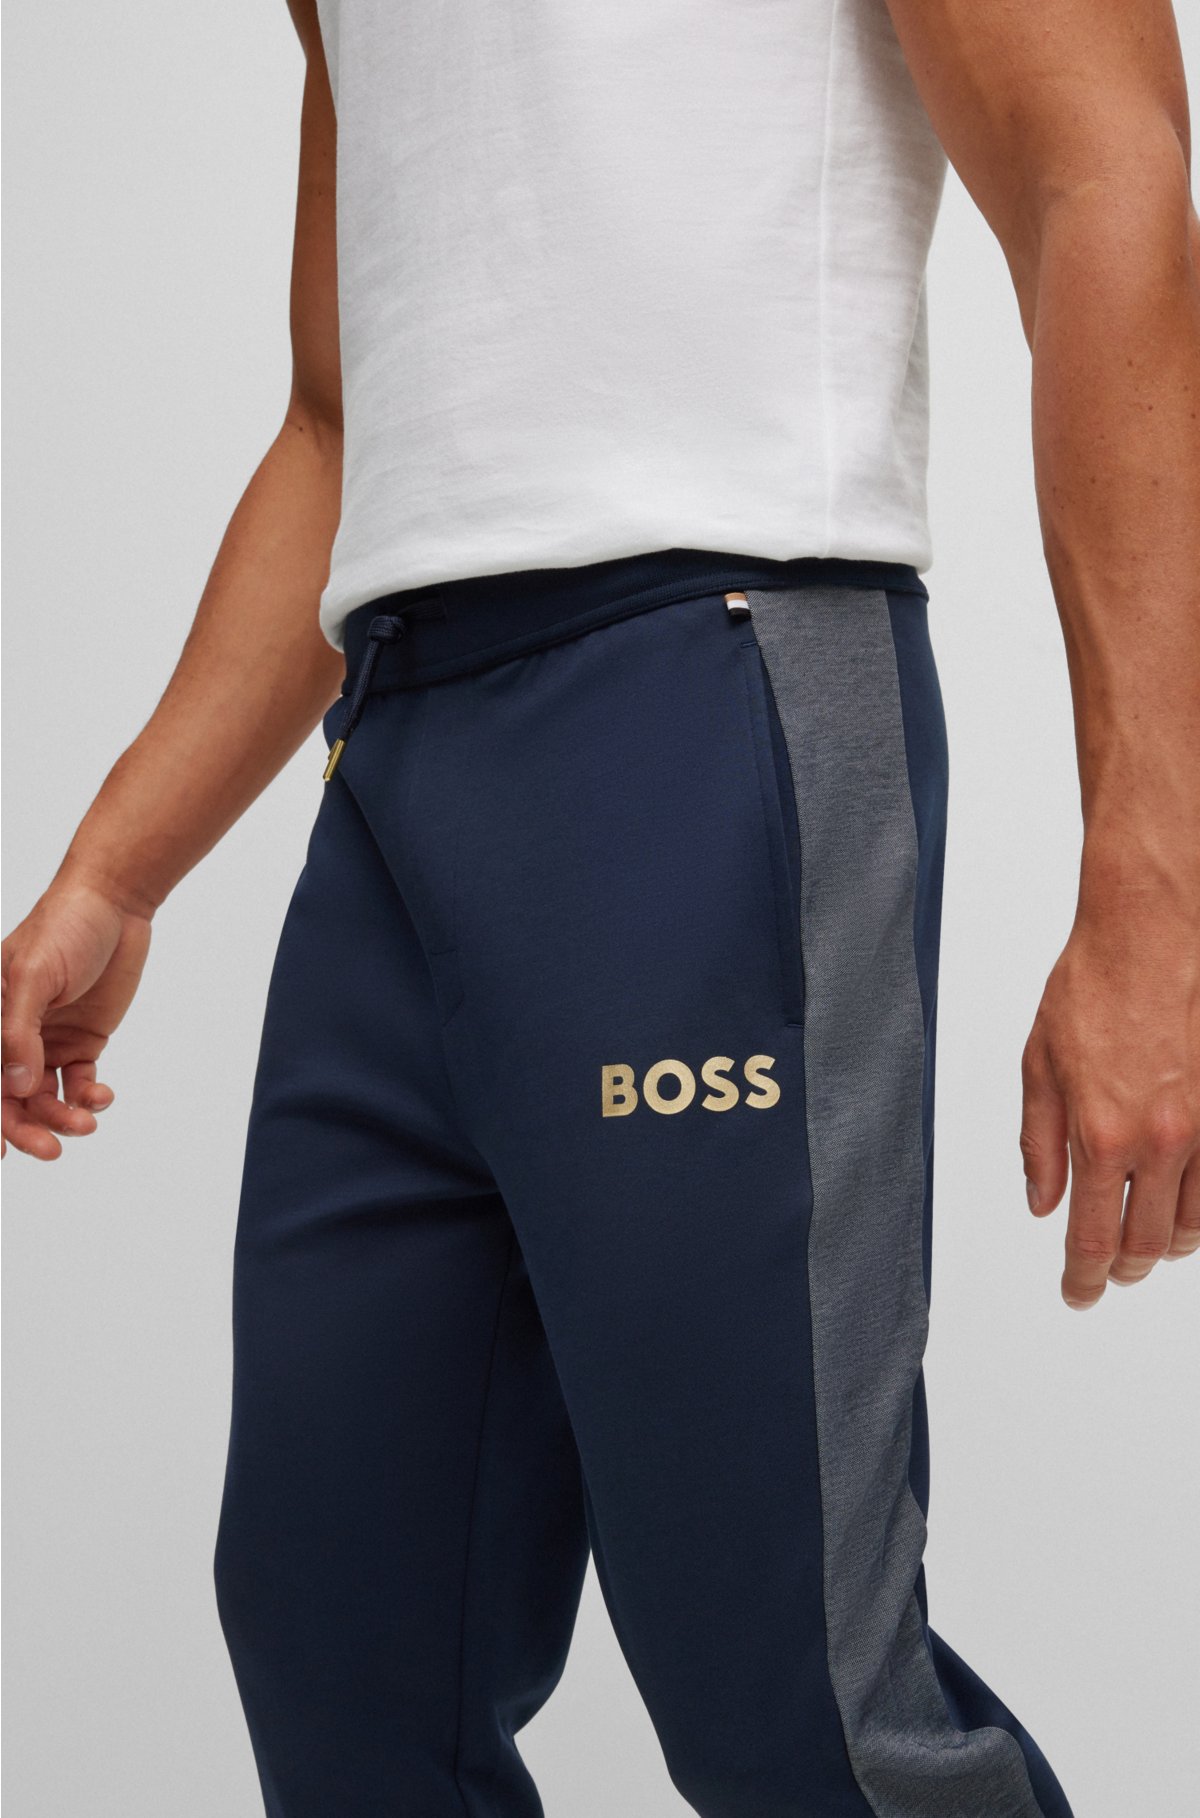 BOSS - logo embroidered Sweatpants with